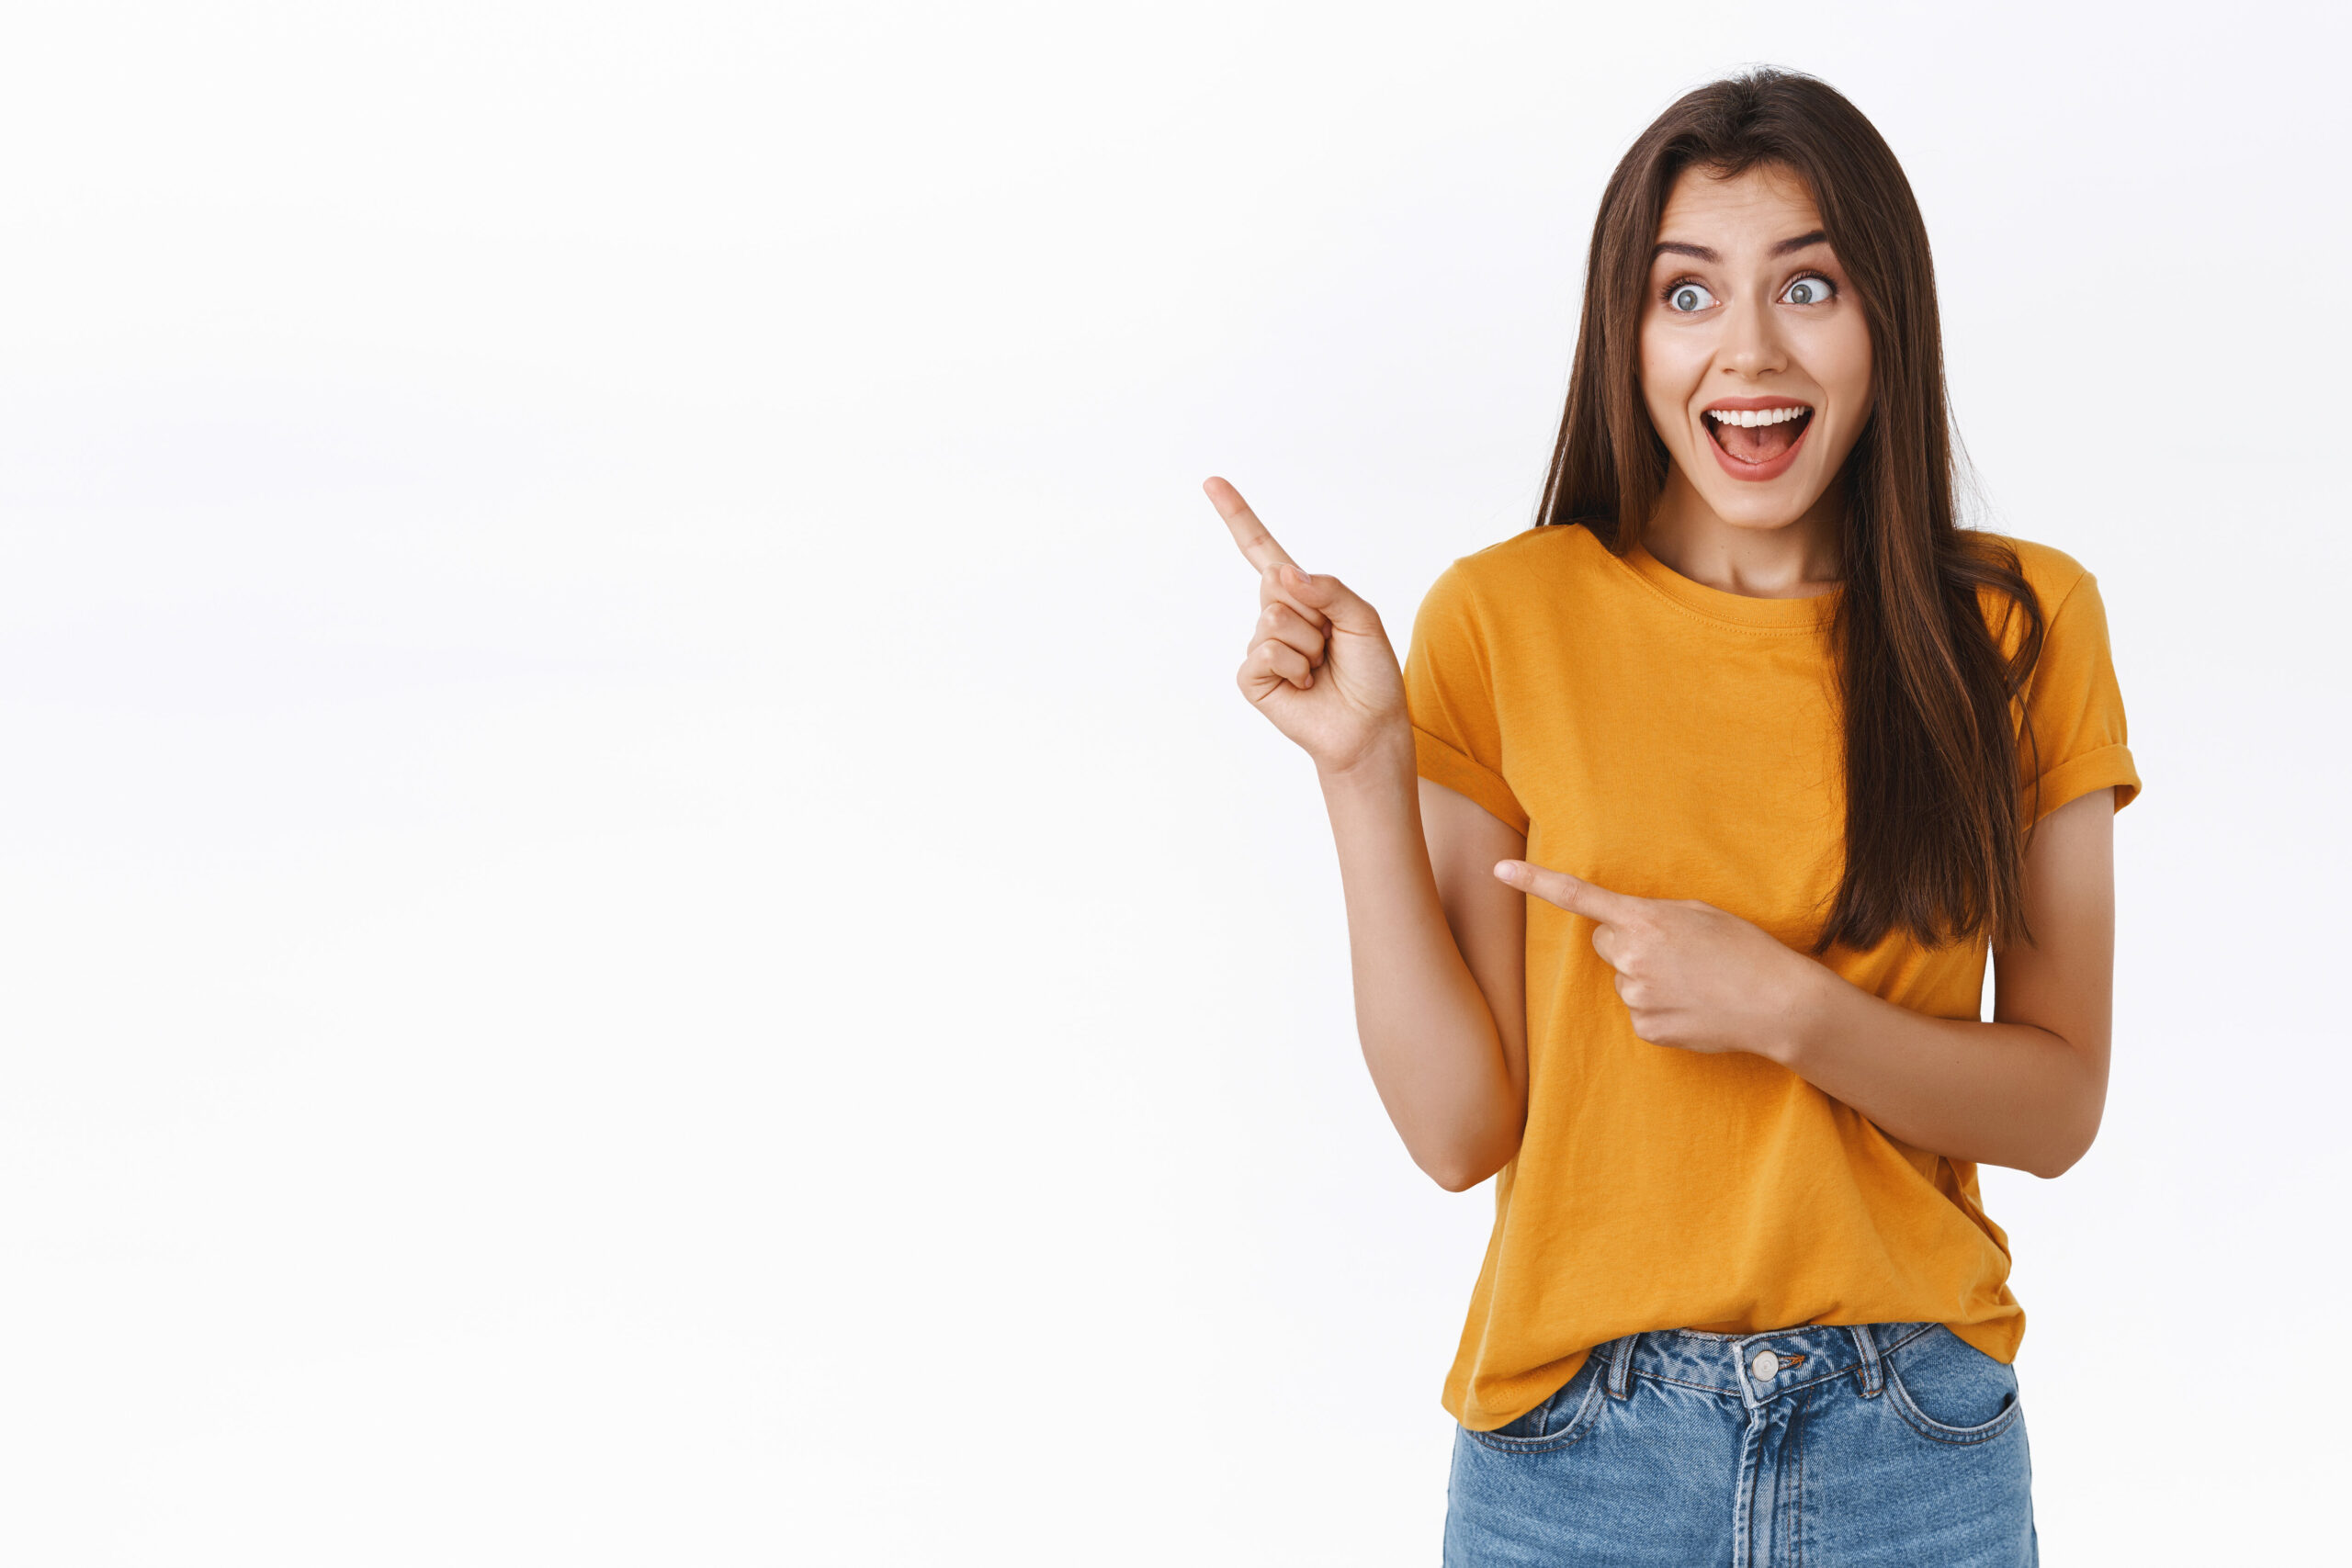 Surprised, astonished brunette girl see famous celebrity, pointing and staring thrilled upper left corner, smiling with impressed astonished expression, standing fascinated white background.